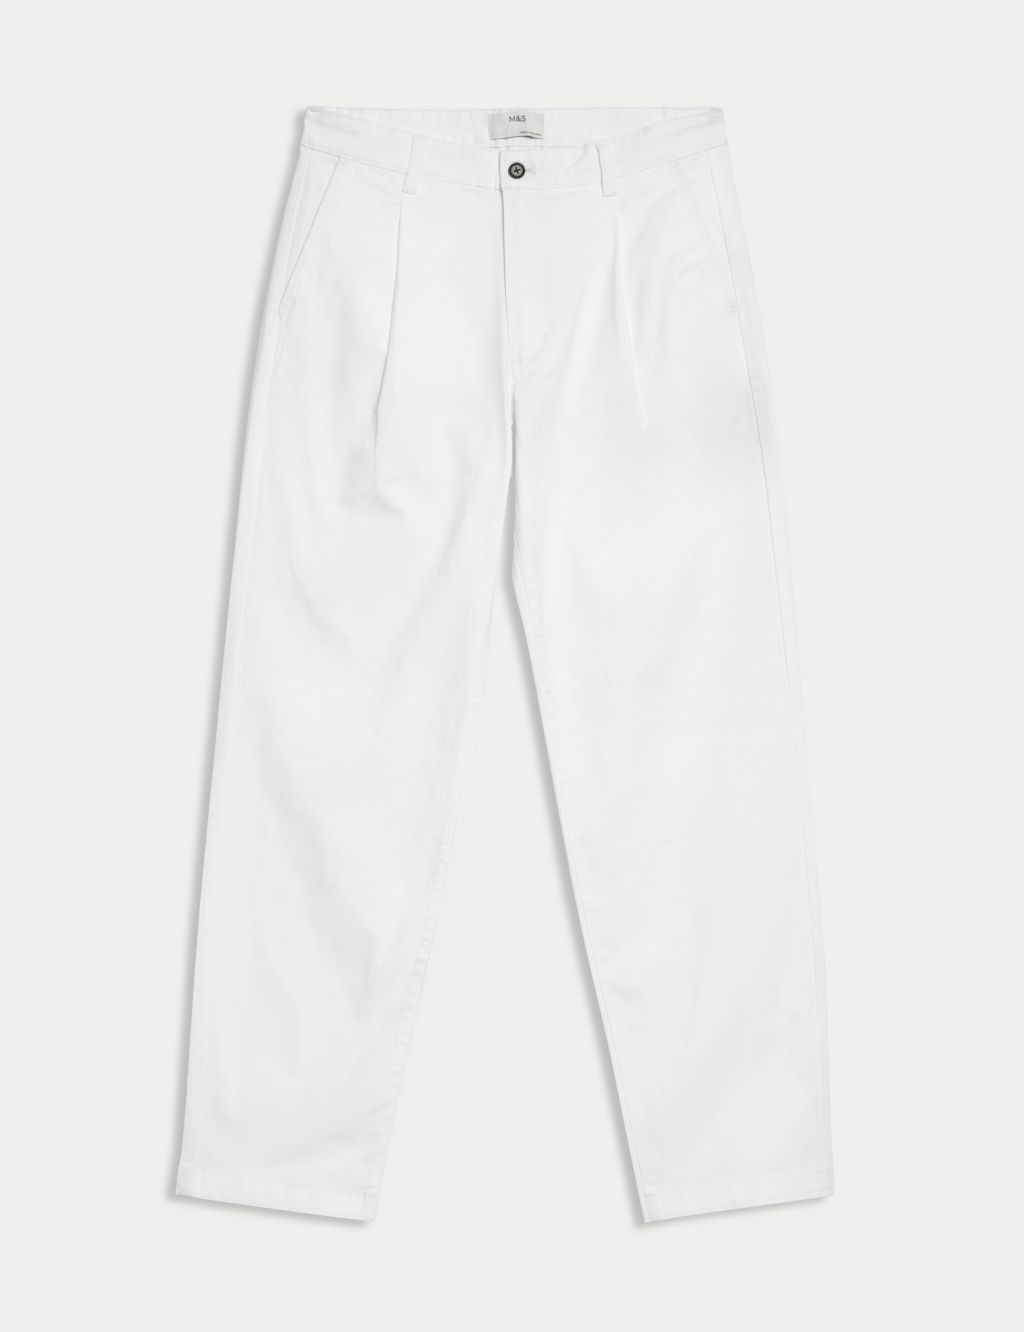 Regular Fit Single Pleat Stretch Chinos 1 of 6